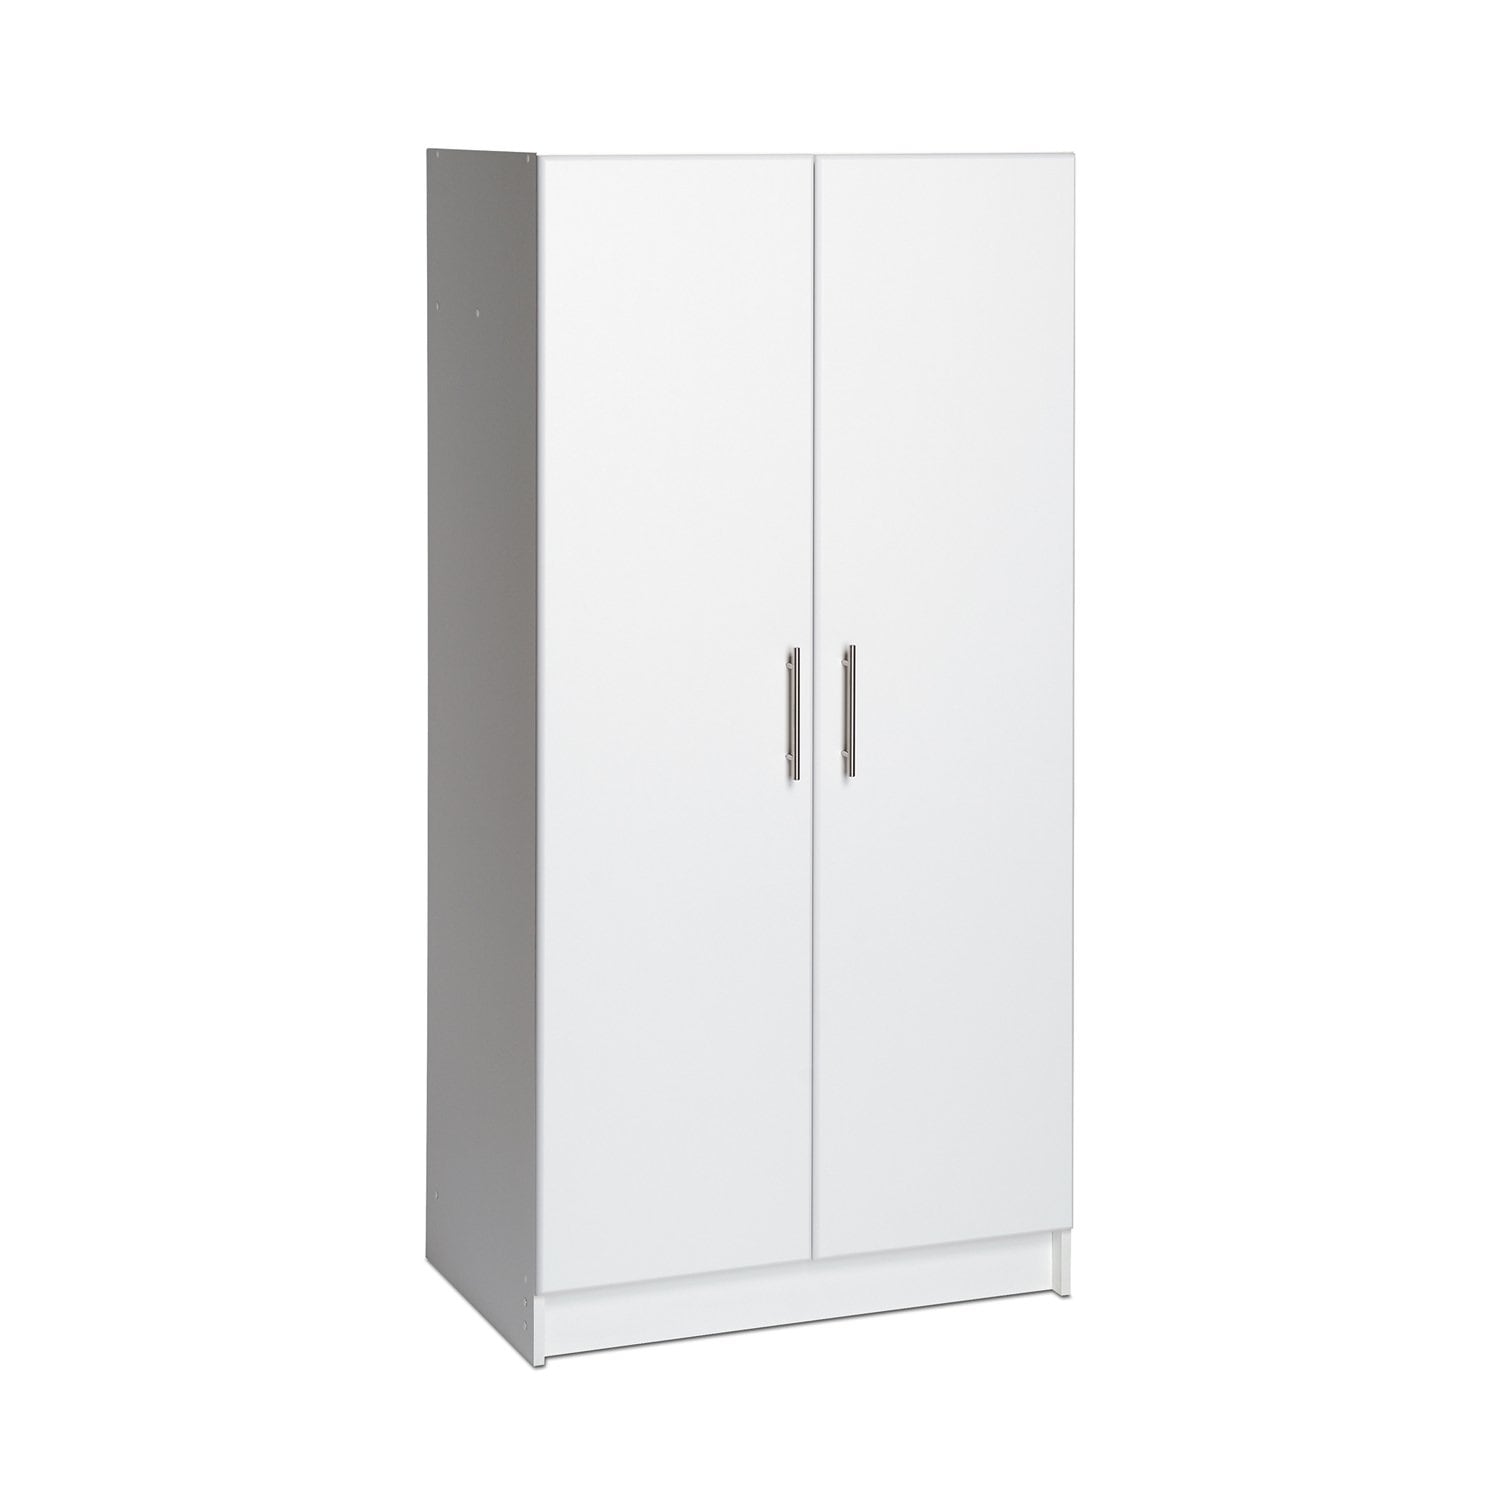  Harper & Bright Designs Wood Shutter Wardrobe with Storage  Shelves, Modern 3-Door Large Armoire Wardrobe Cabinet with Hanging Rail for  Clothes, Bedroom Organizer,Free-Standing Garment Closet, White : Home &  Kitchen